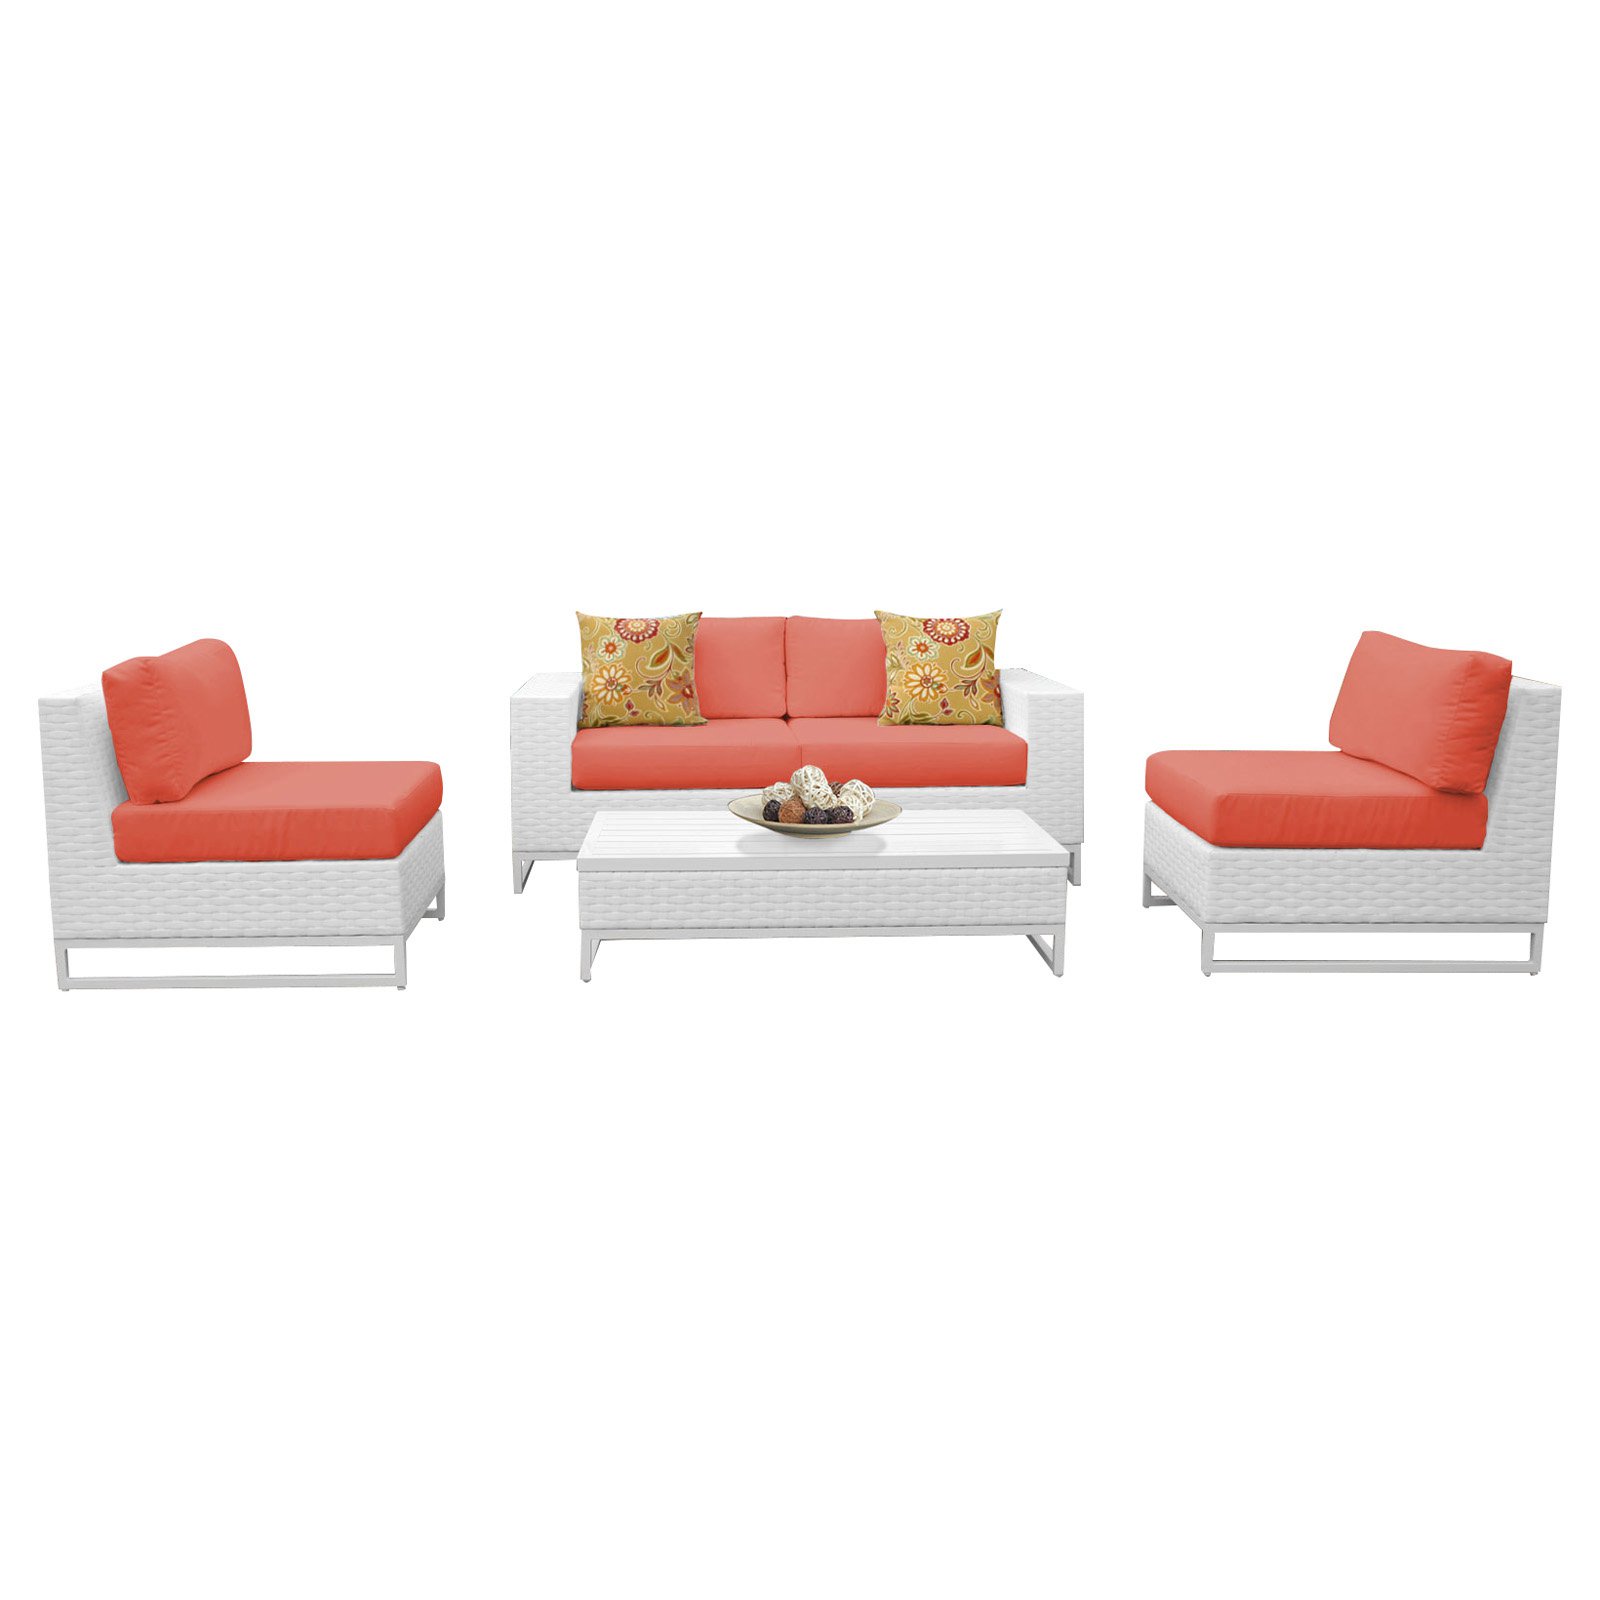 TK Classics Miami Wicker 5 Piece Patio Conversation Set with Armless Chairs - image 2 of 3